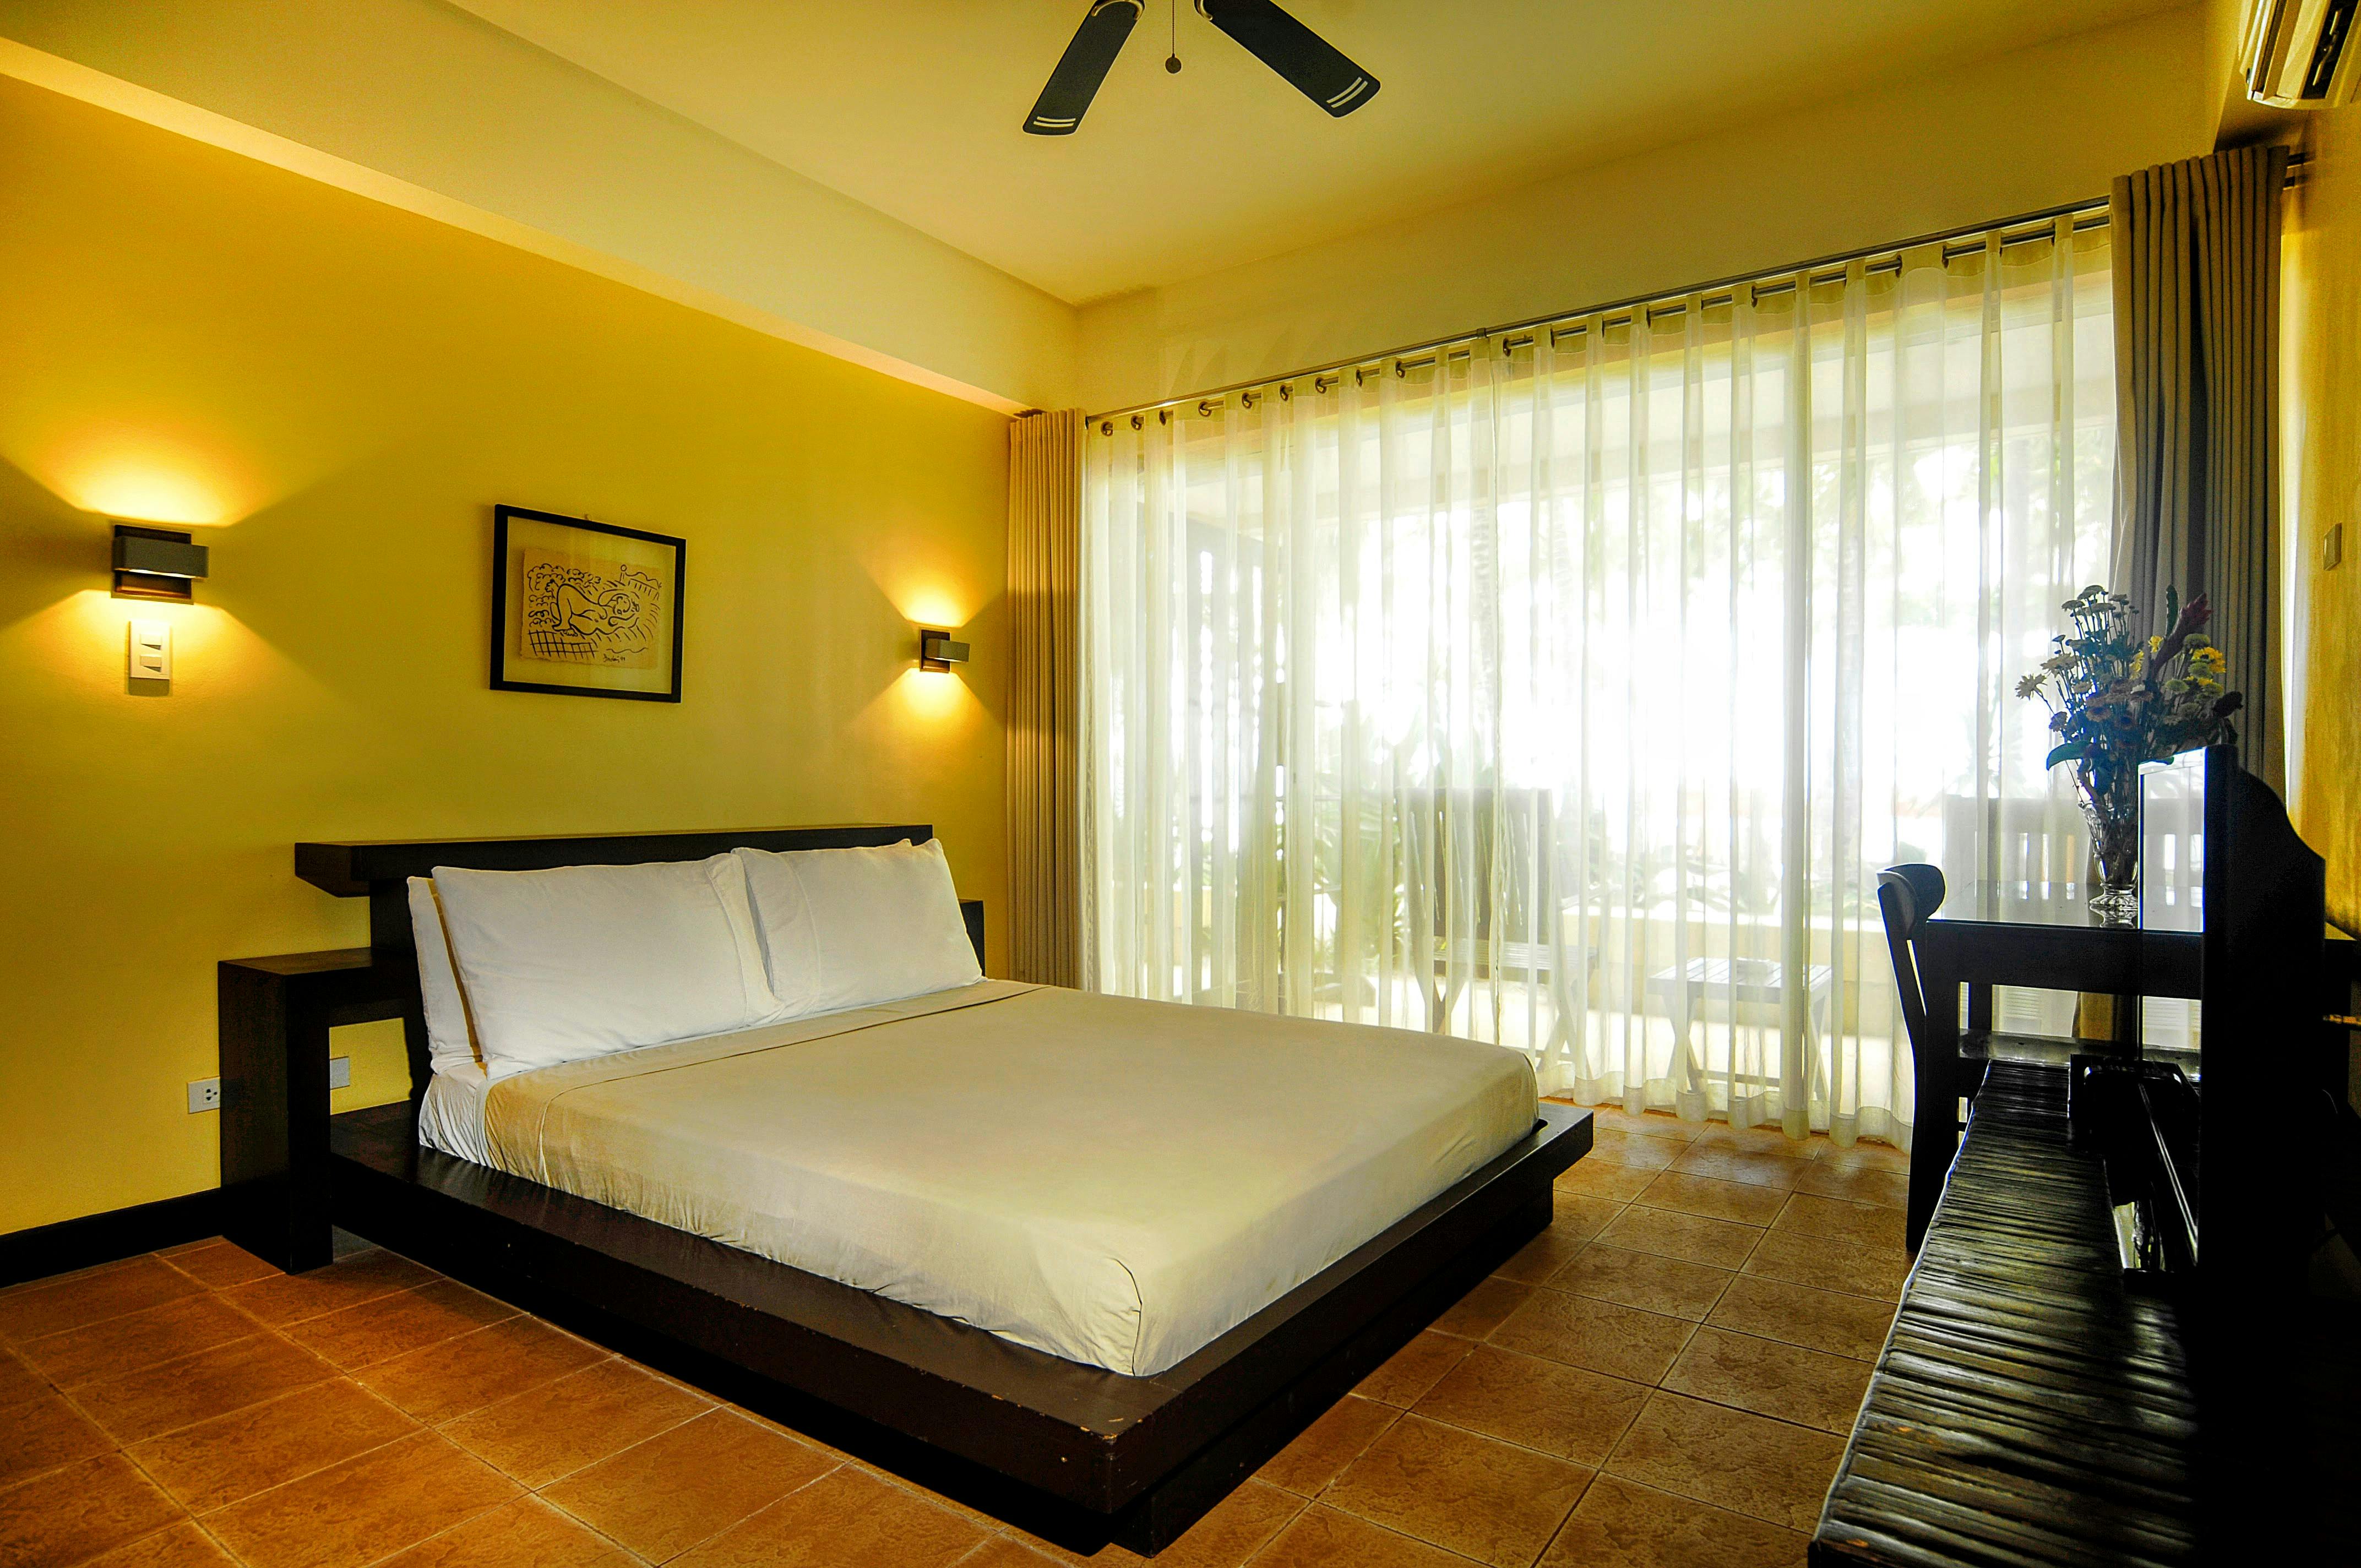 Tagbanua bedroom with closed thin blinds - 1 bedroom absolute beachfront apartment at Boracay SandCastles The Apartments.